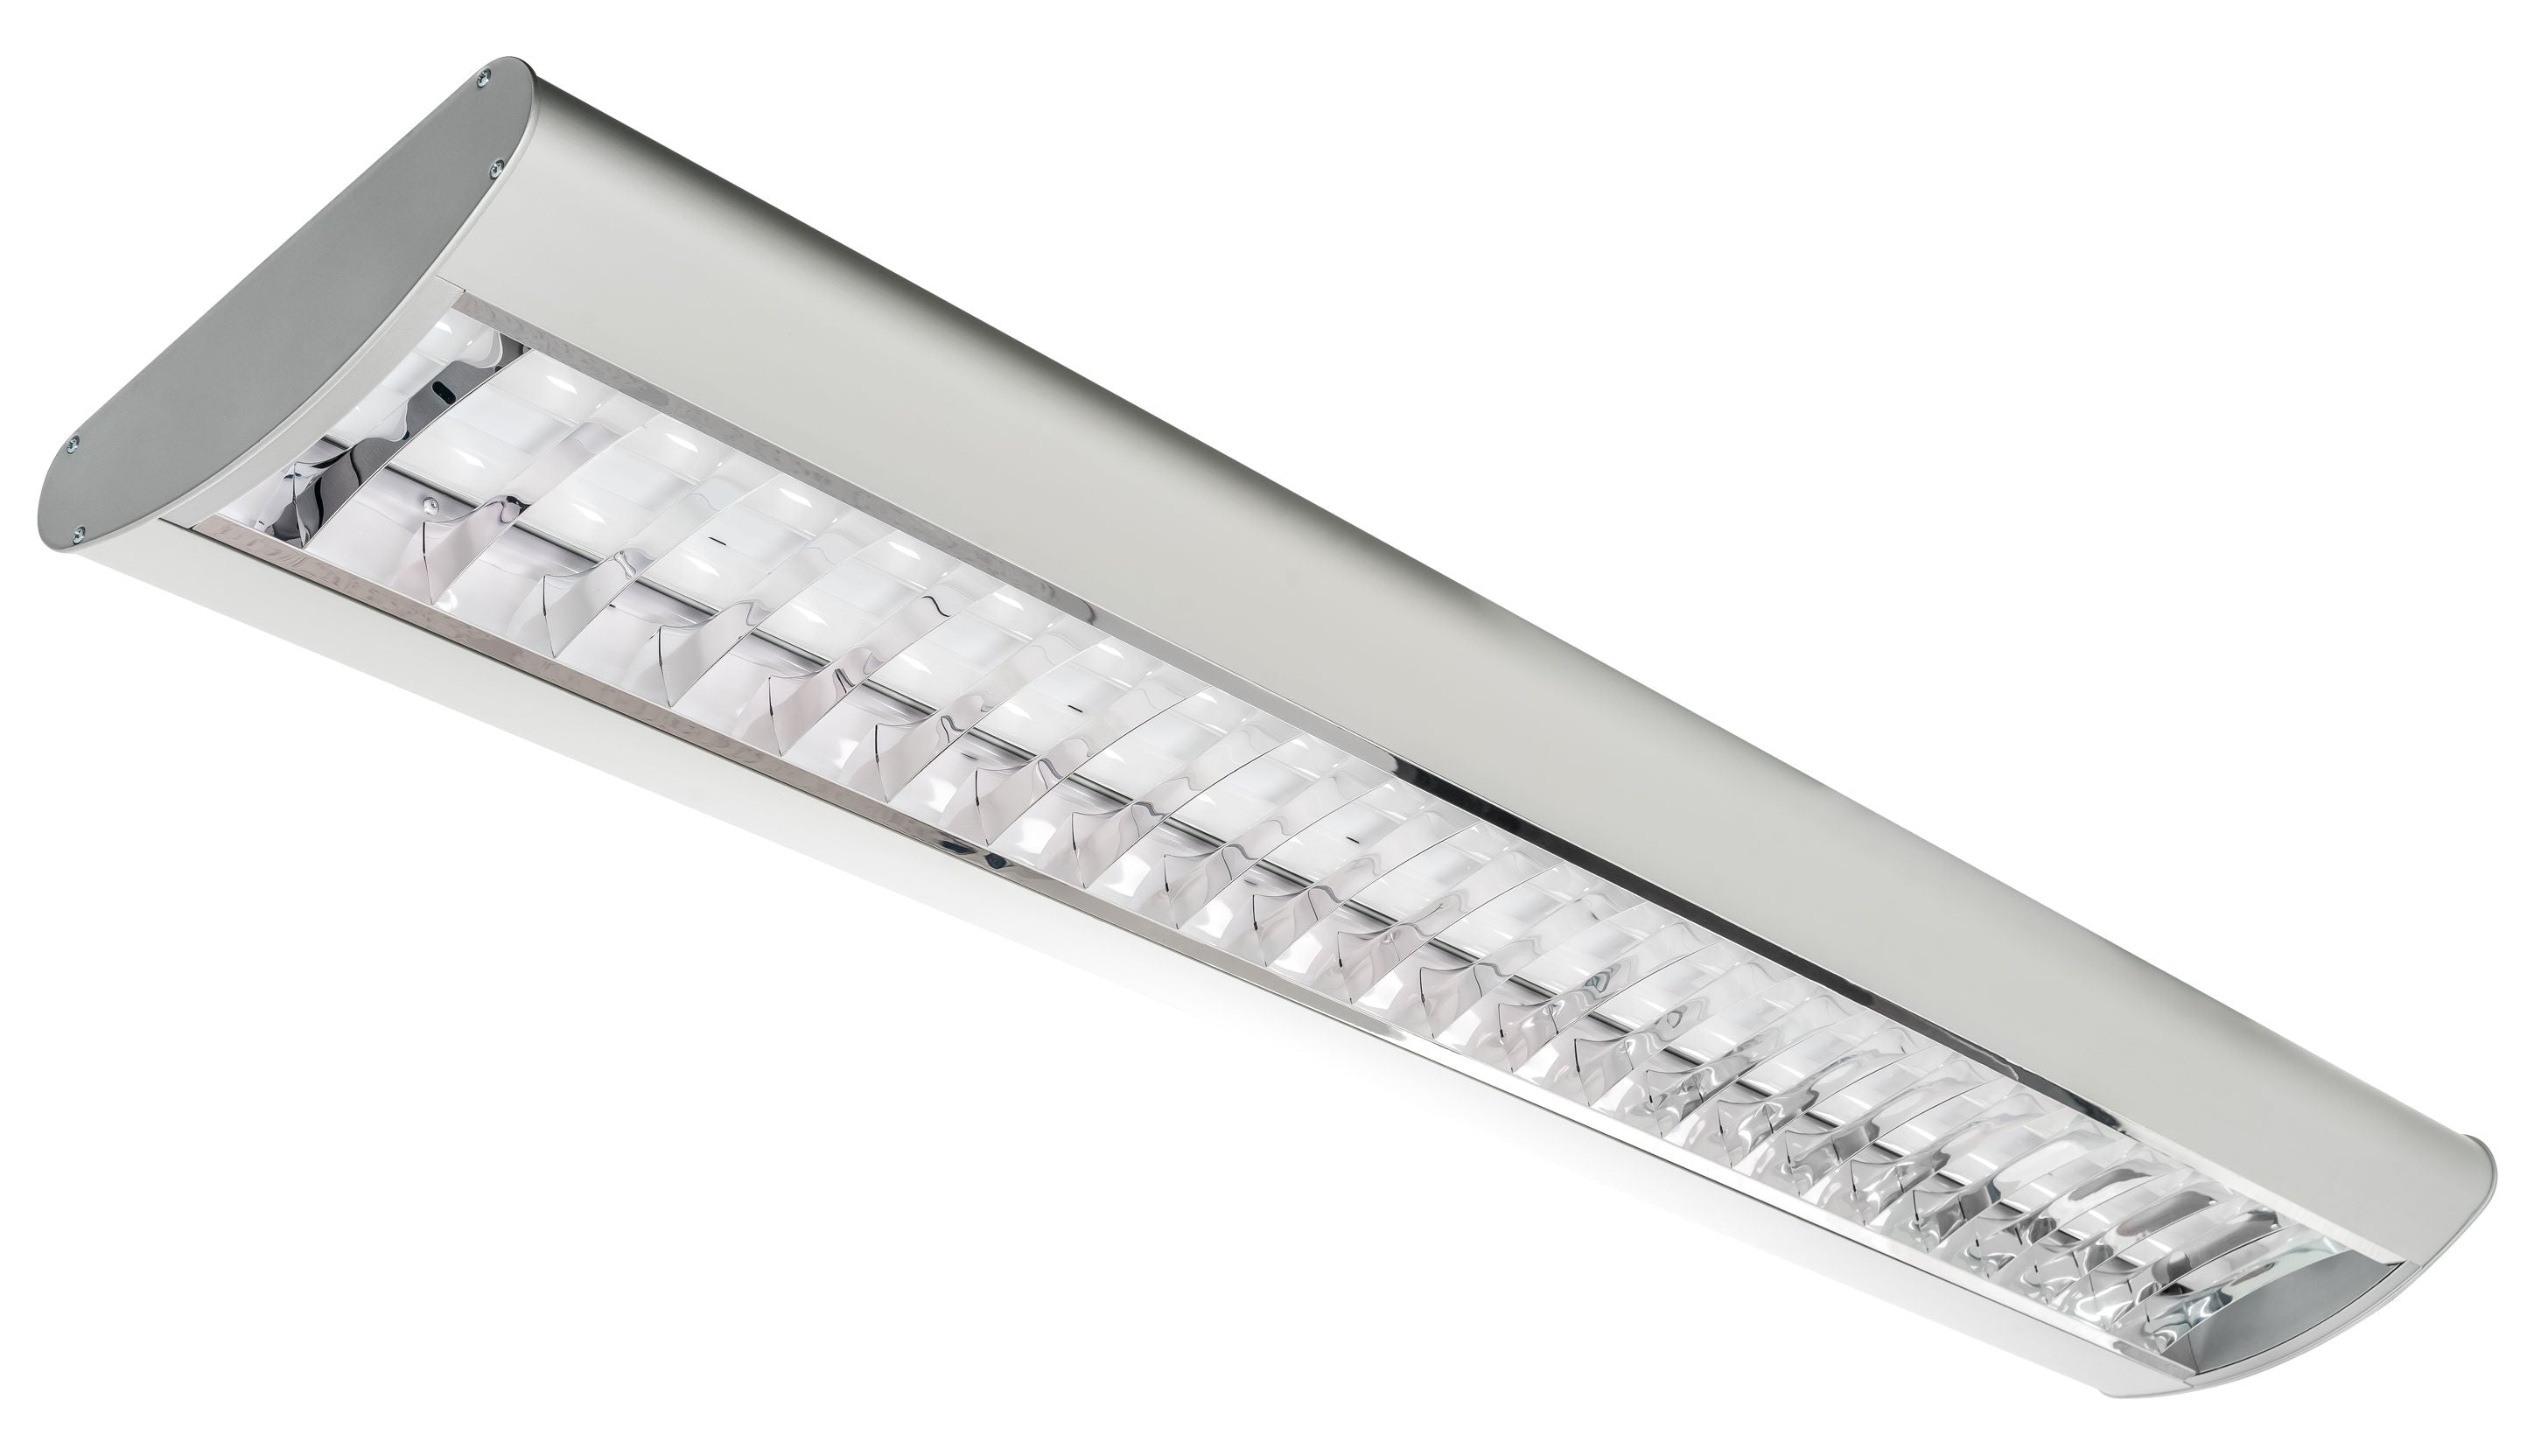 Westgate SCLP-4FT-40W-50K-D LED Architectural Parabolic Suspended Down Light - White